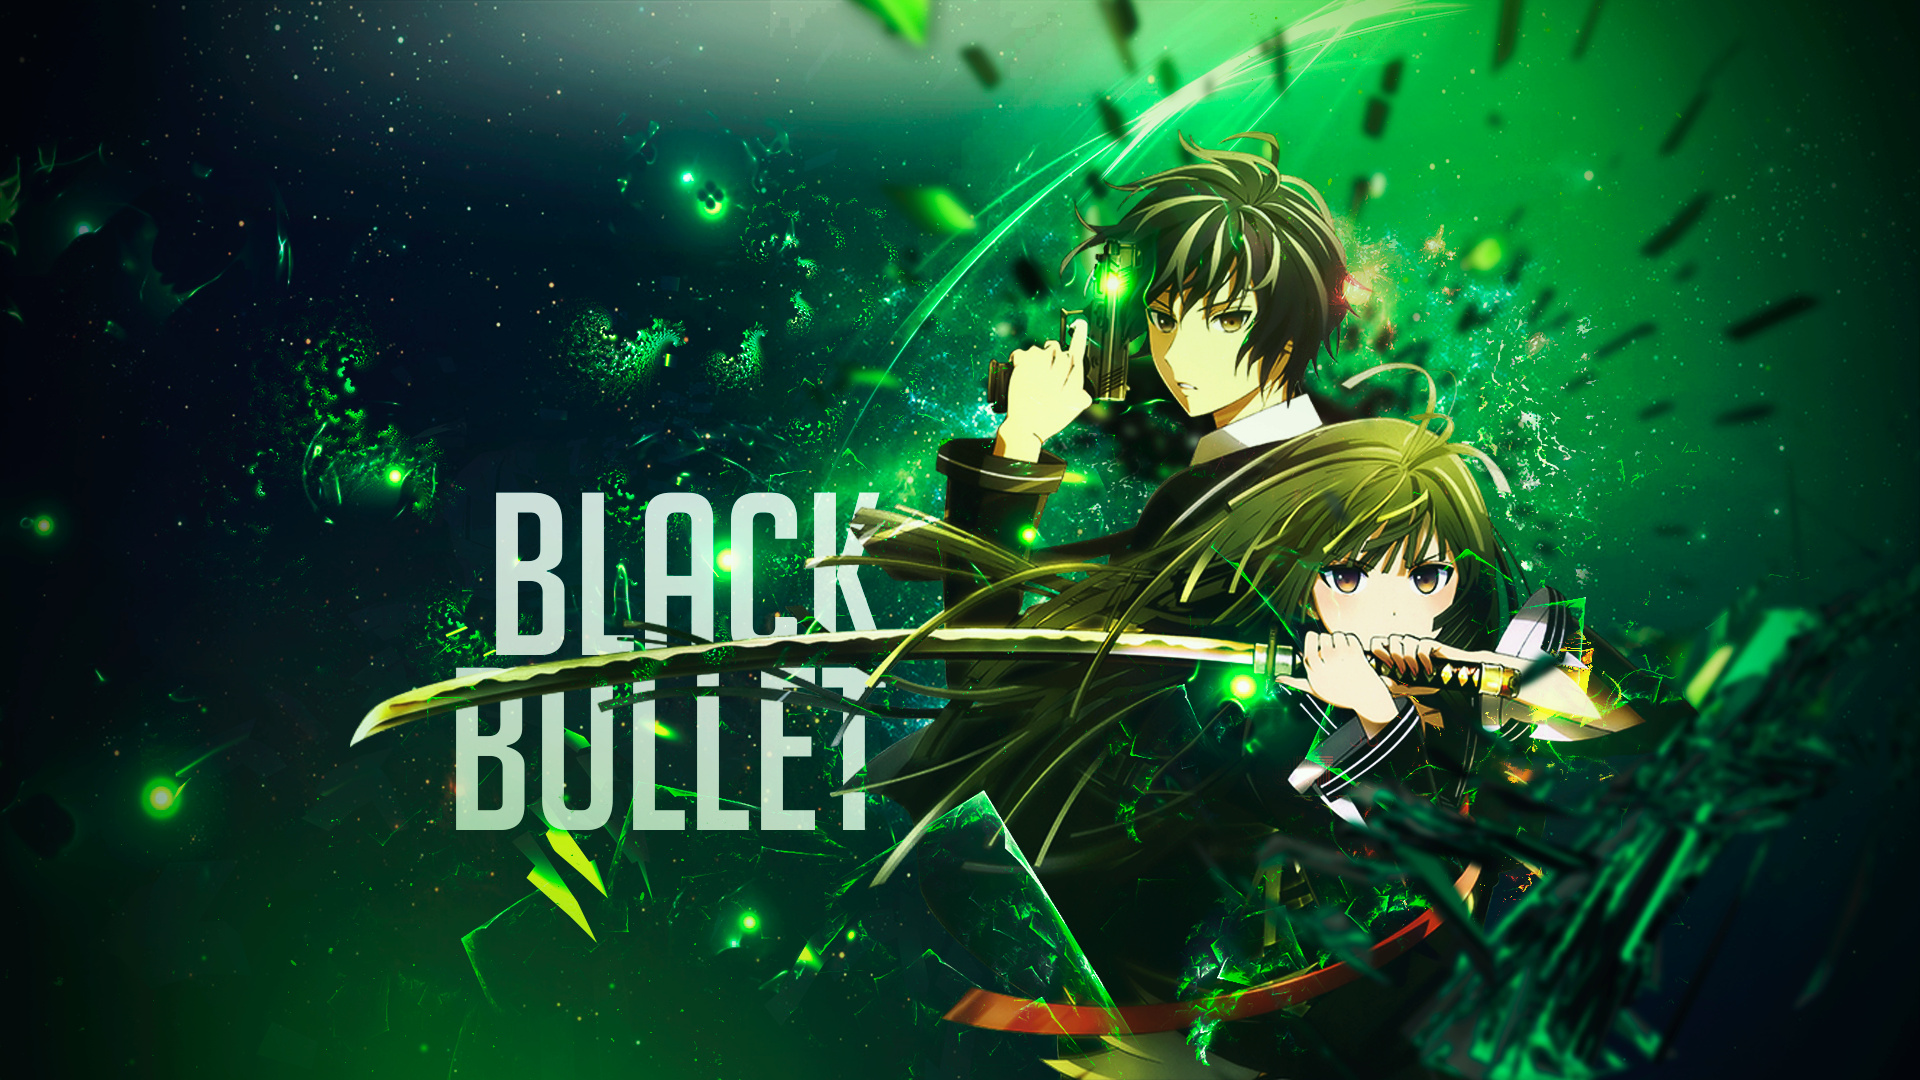 Black Bullet (Anime): Pistol, Sword, Television series adaptation animated by Kinema Citrus and Orange. 1920x1080 Full HD Background.